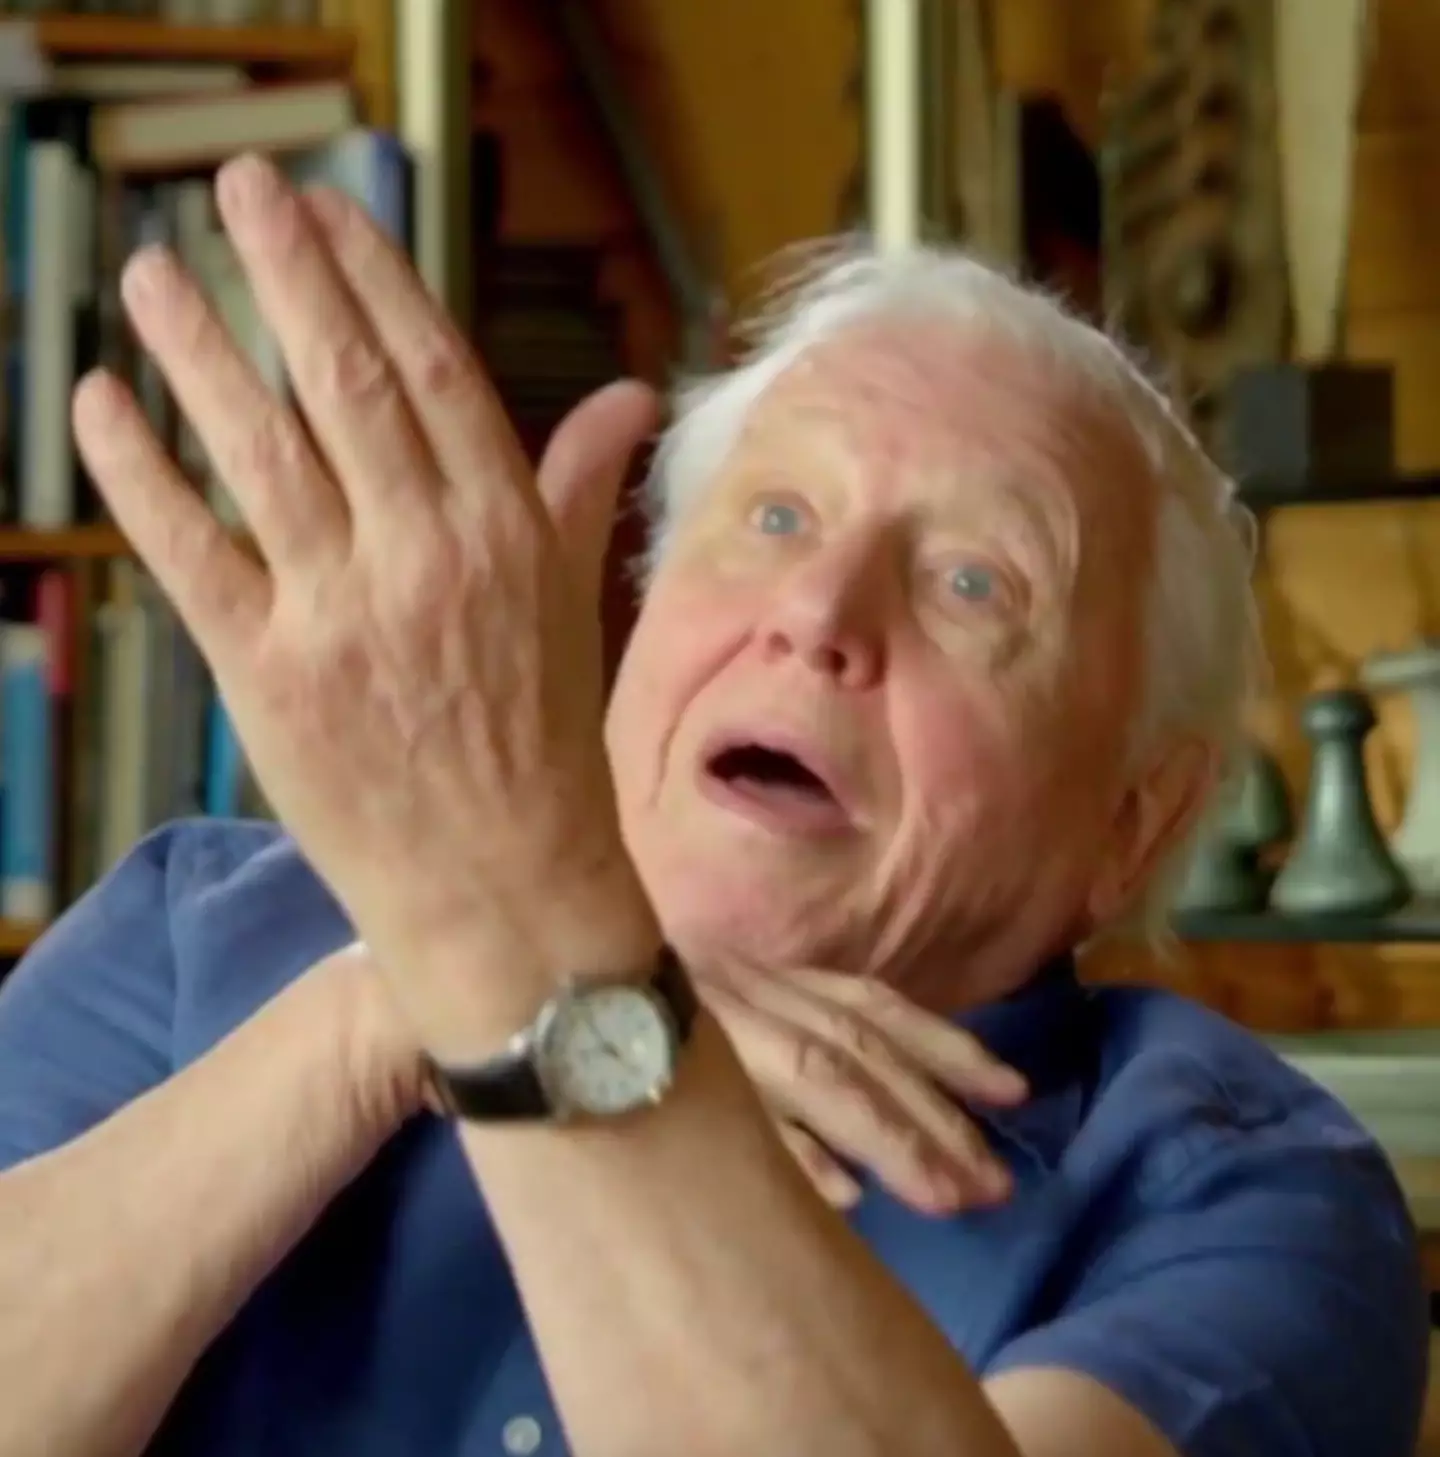 Sir David Attenborough has made an absolutely unbelievable discovery while filming for an upcoming BBC show.